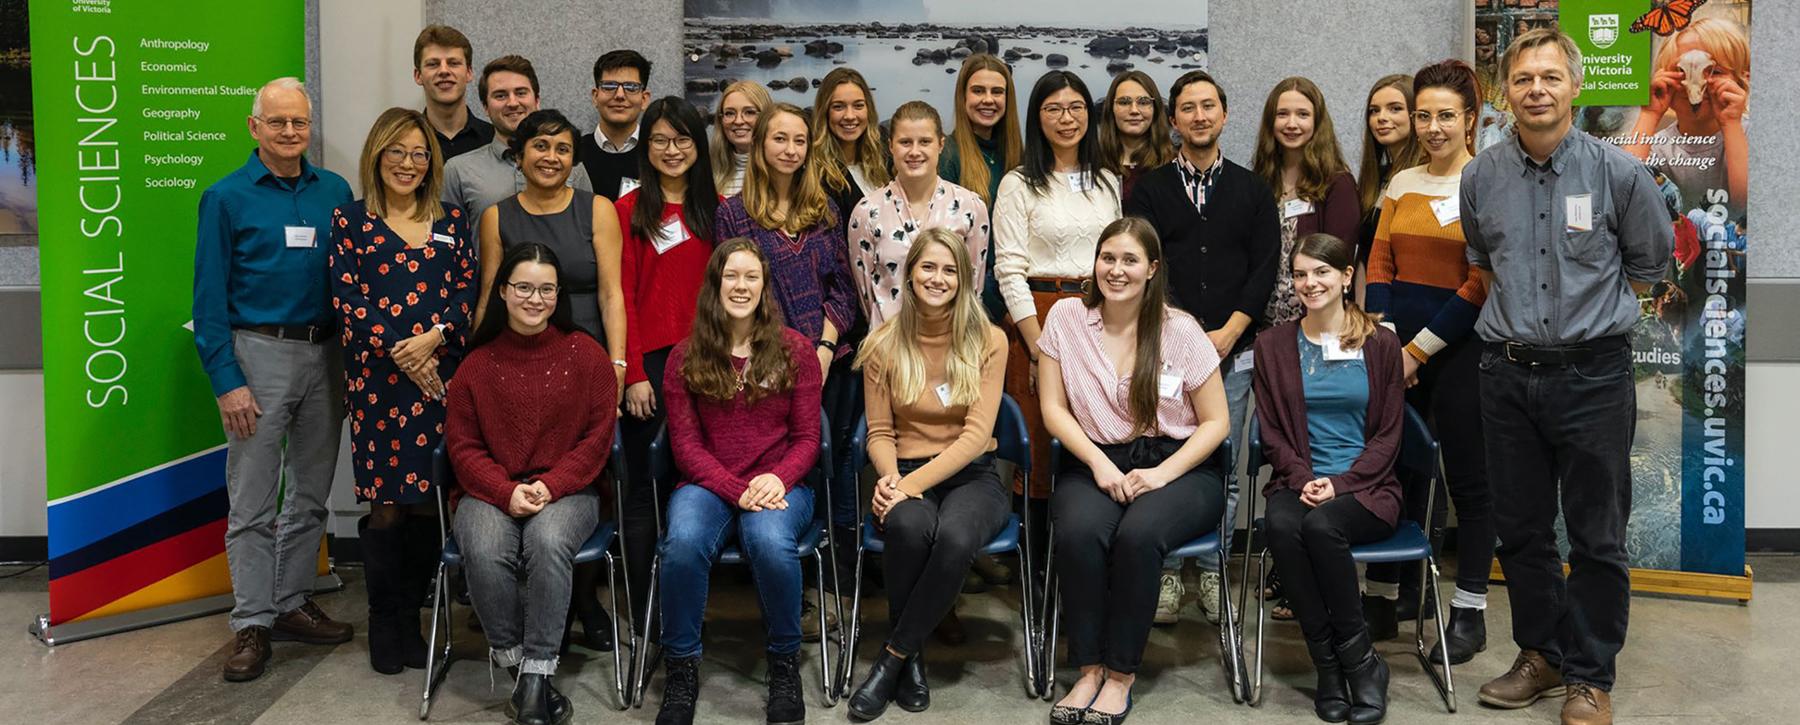 Group photo of the 2020 psychology Rising Star students